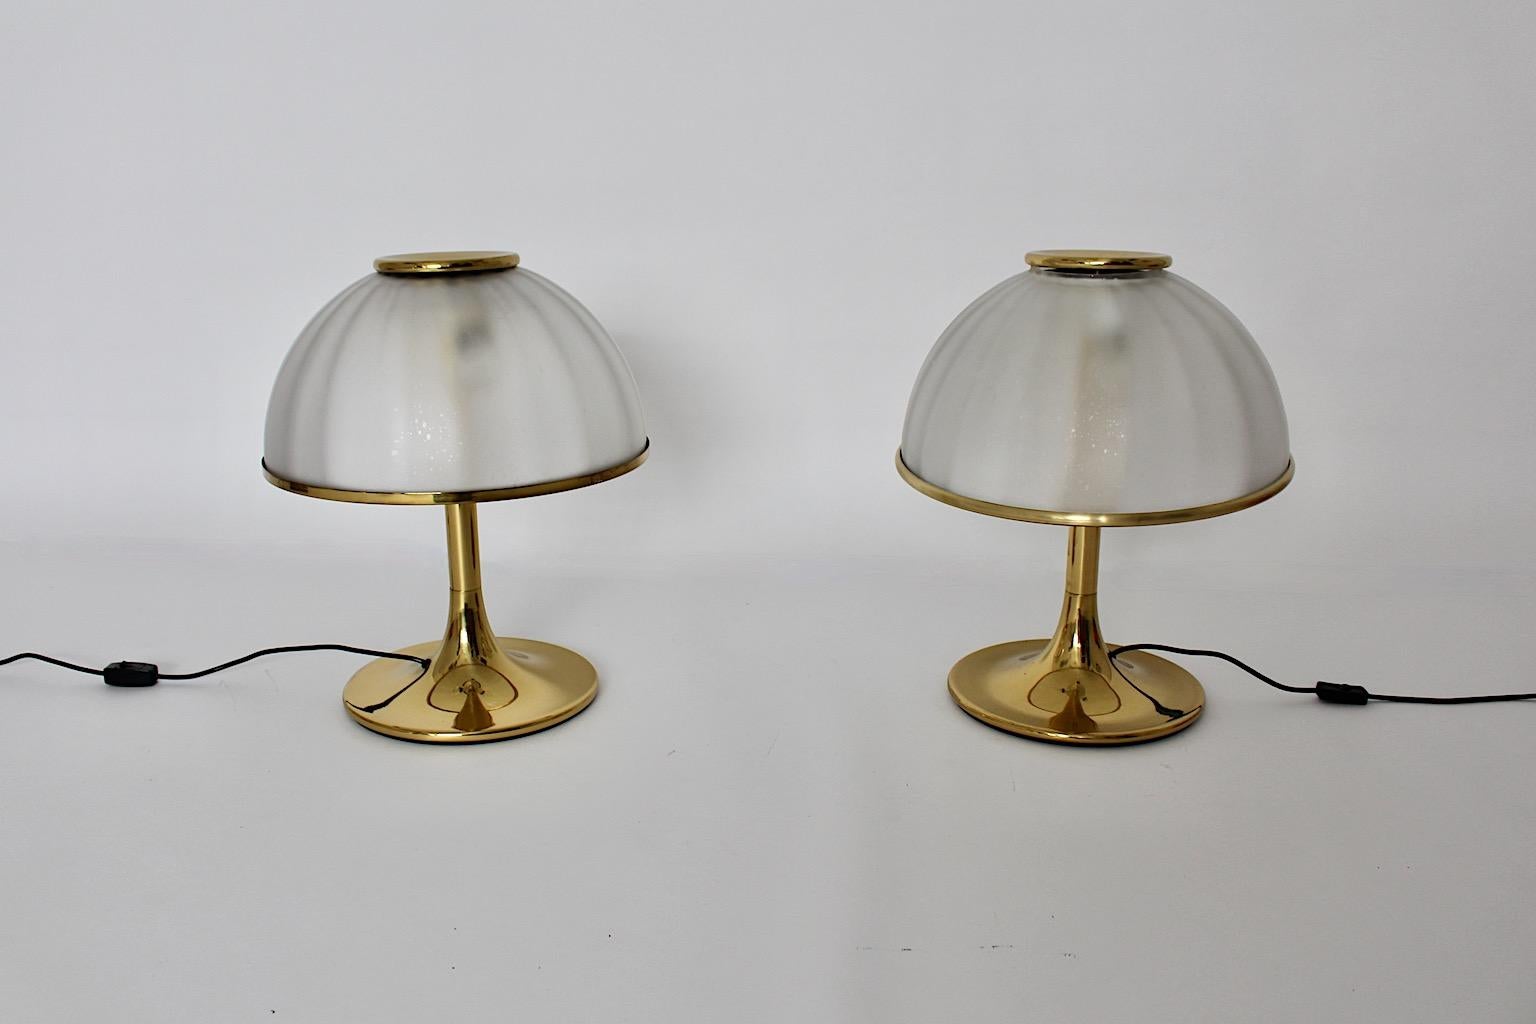 Hollywood Regency Style Gabriella Crespi Style vintage pair of glass brass mushroom like table lamps 1970s Italy.
A beautiful and extraordinary duo or pair of table lamps from brass and iridescent glass with nice air bubbles rounded with a brass